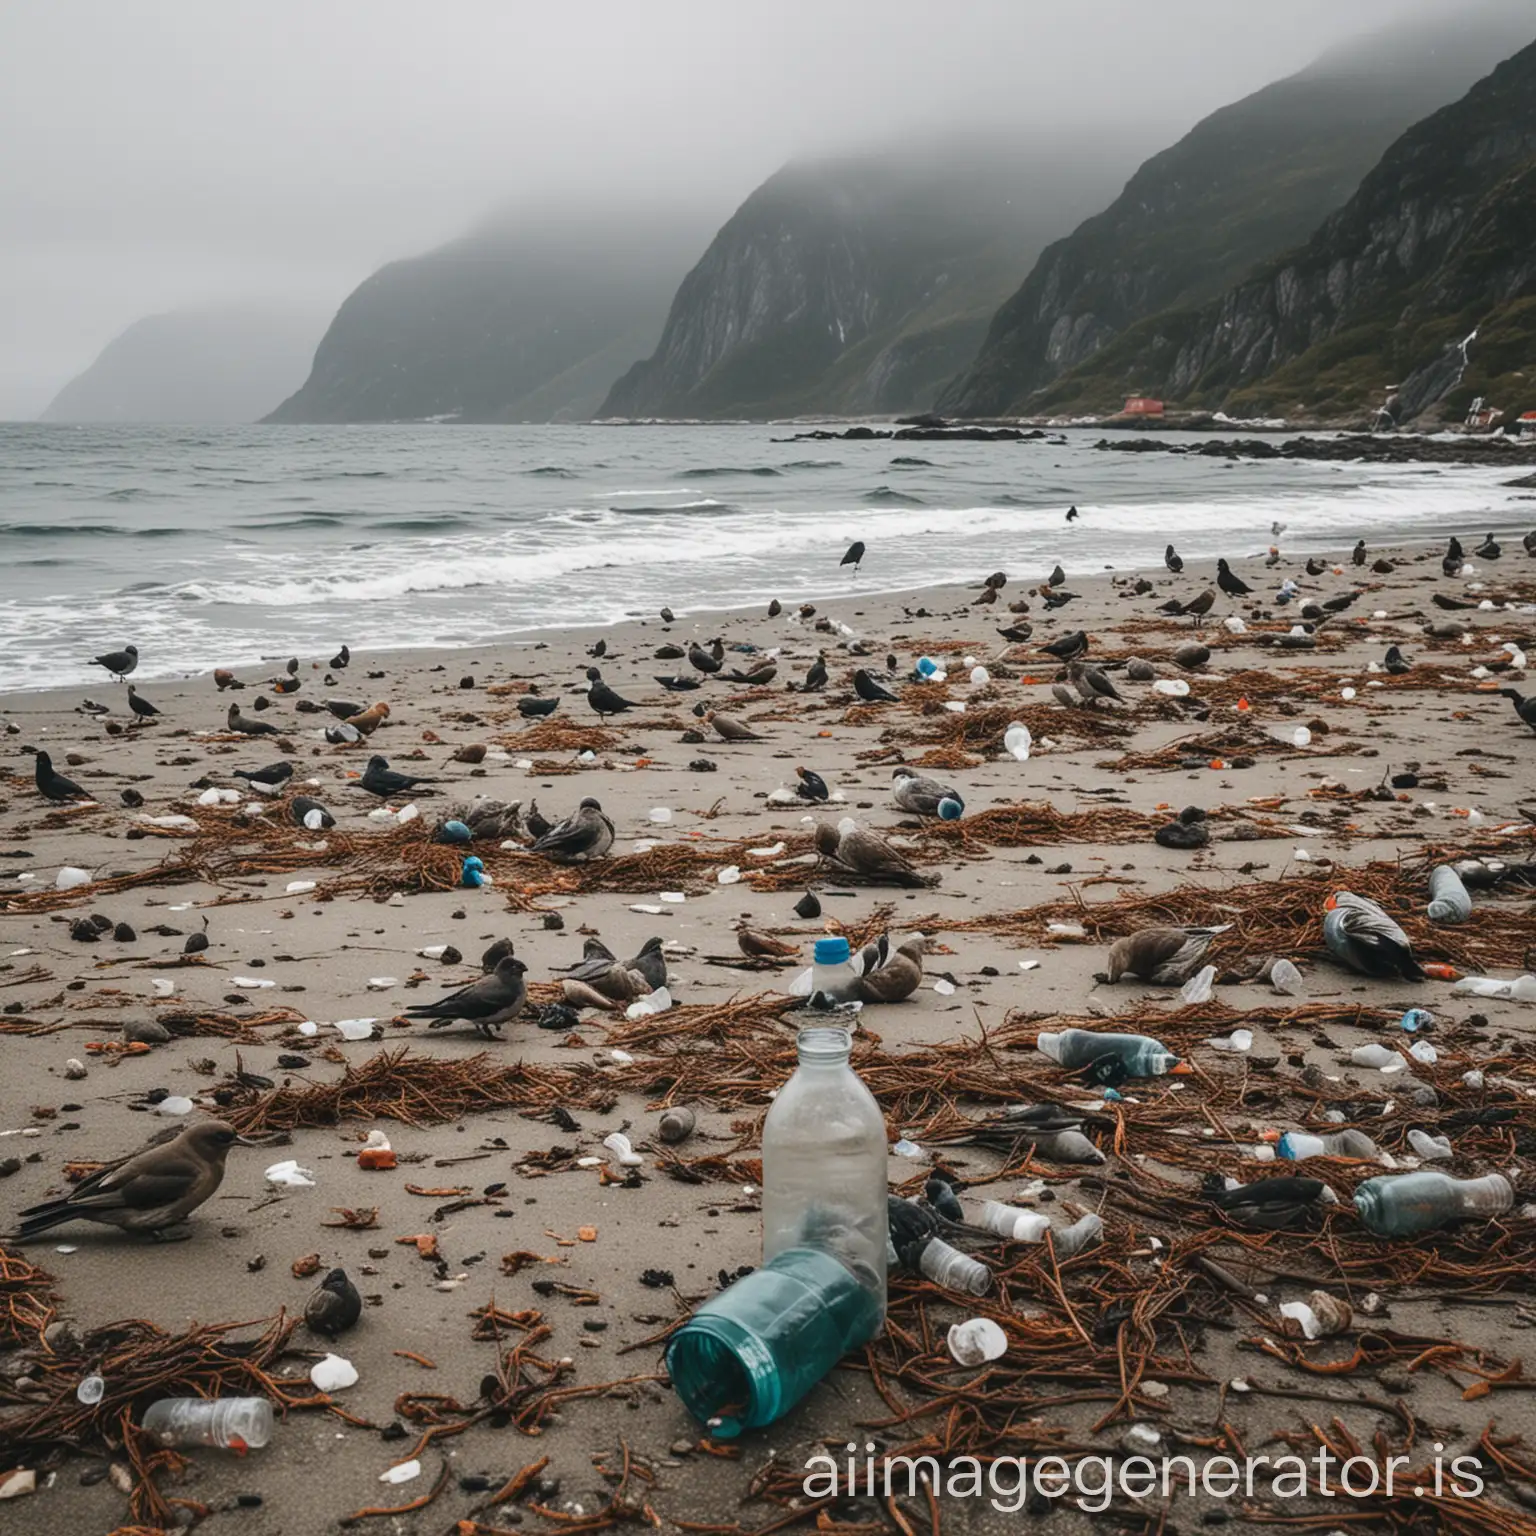 It is an overcast day on a norwegian beach. There are plastic bottles on the ground, and birds sitting near them.